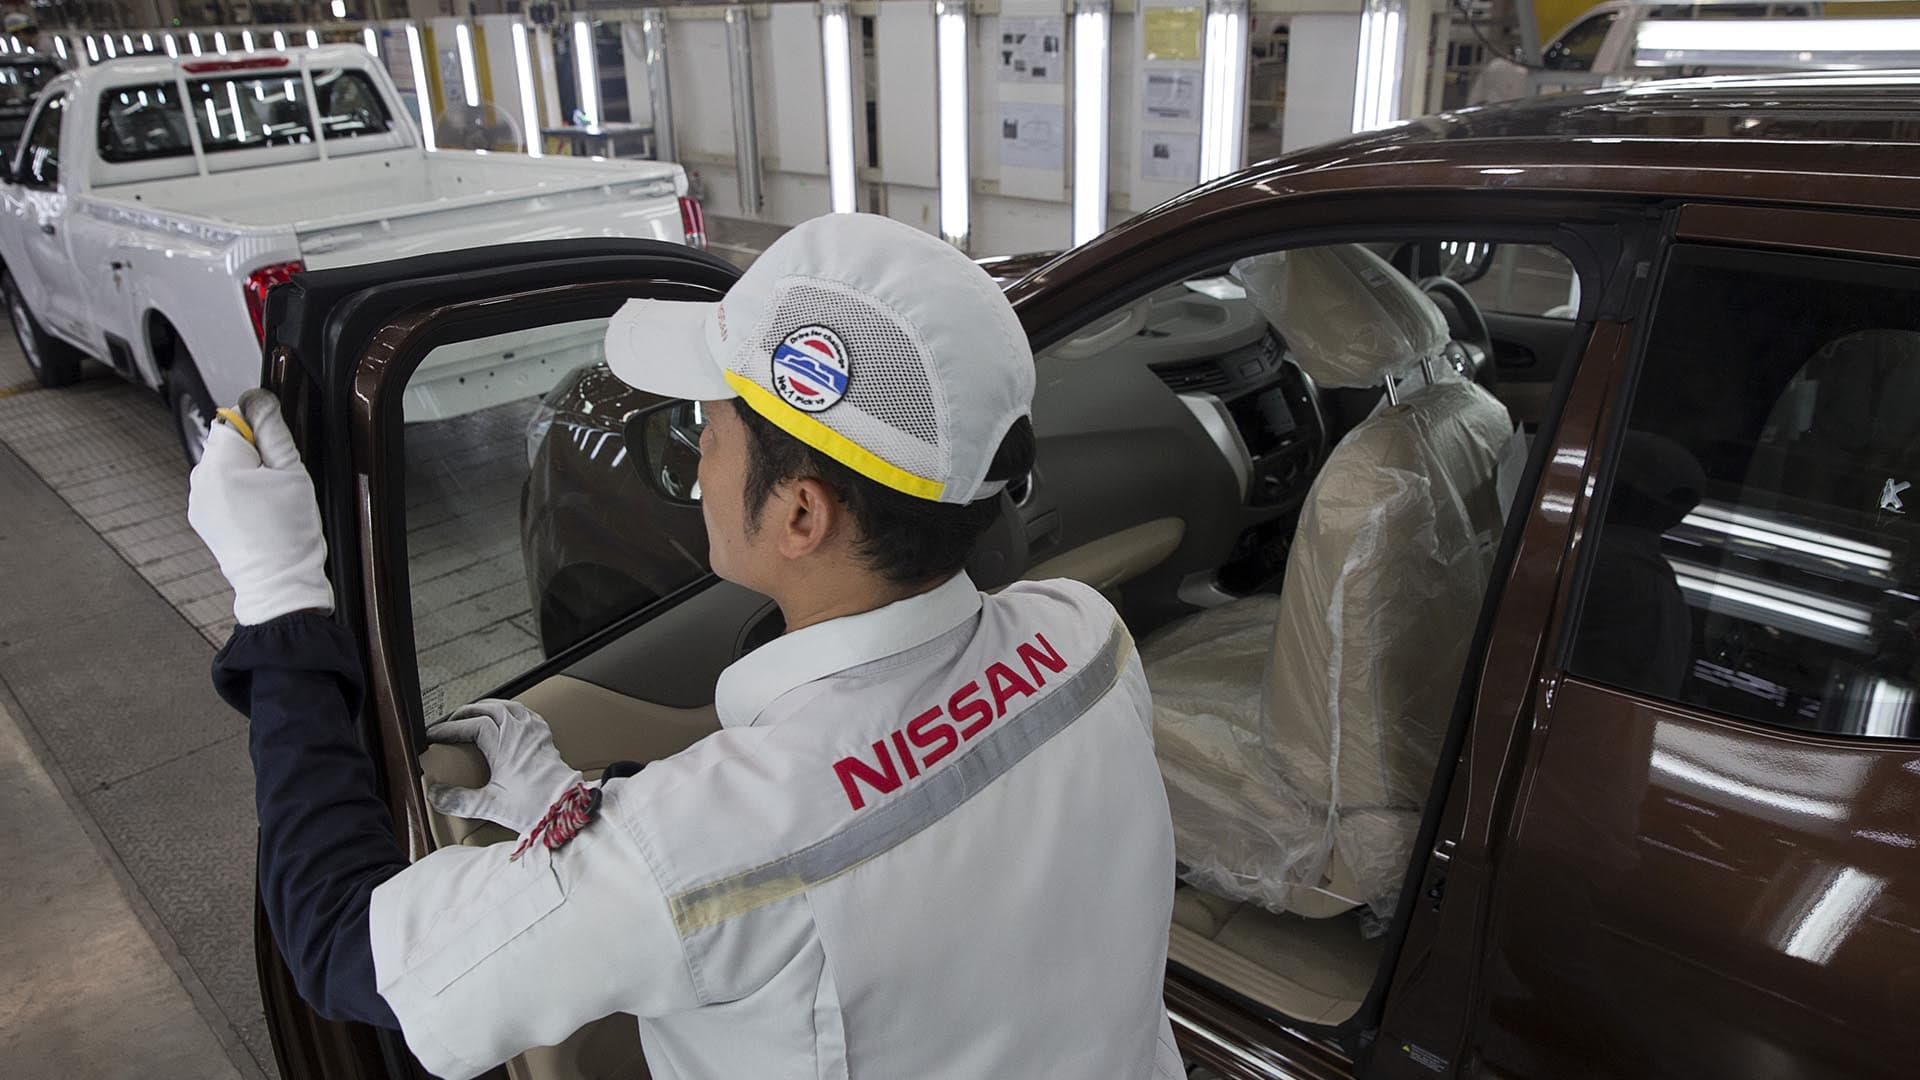 Nissan Suspends Production of its Cars for Japan